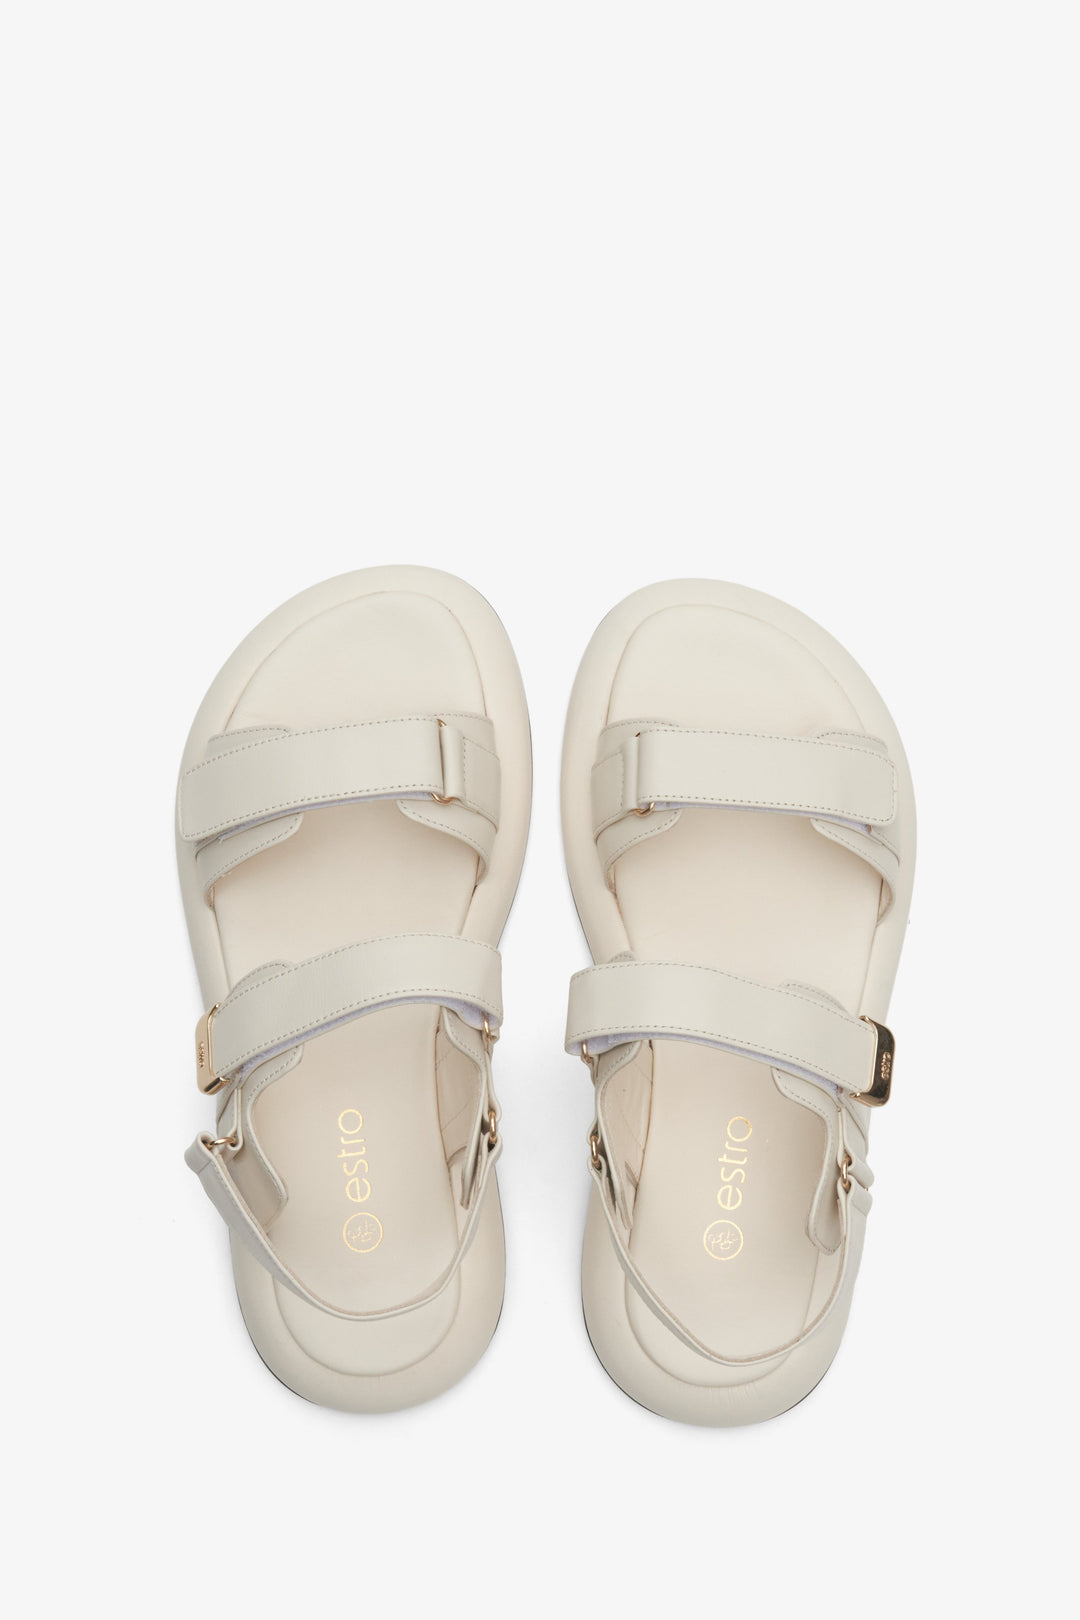 Light beige women's sandals by Estro made of Italian natural leather - presentation of the model from above.